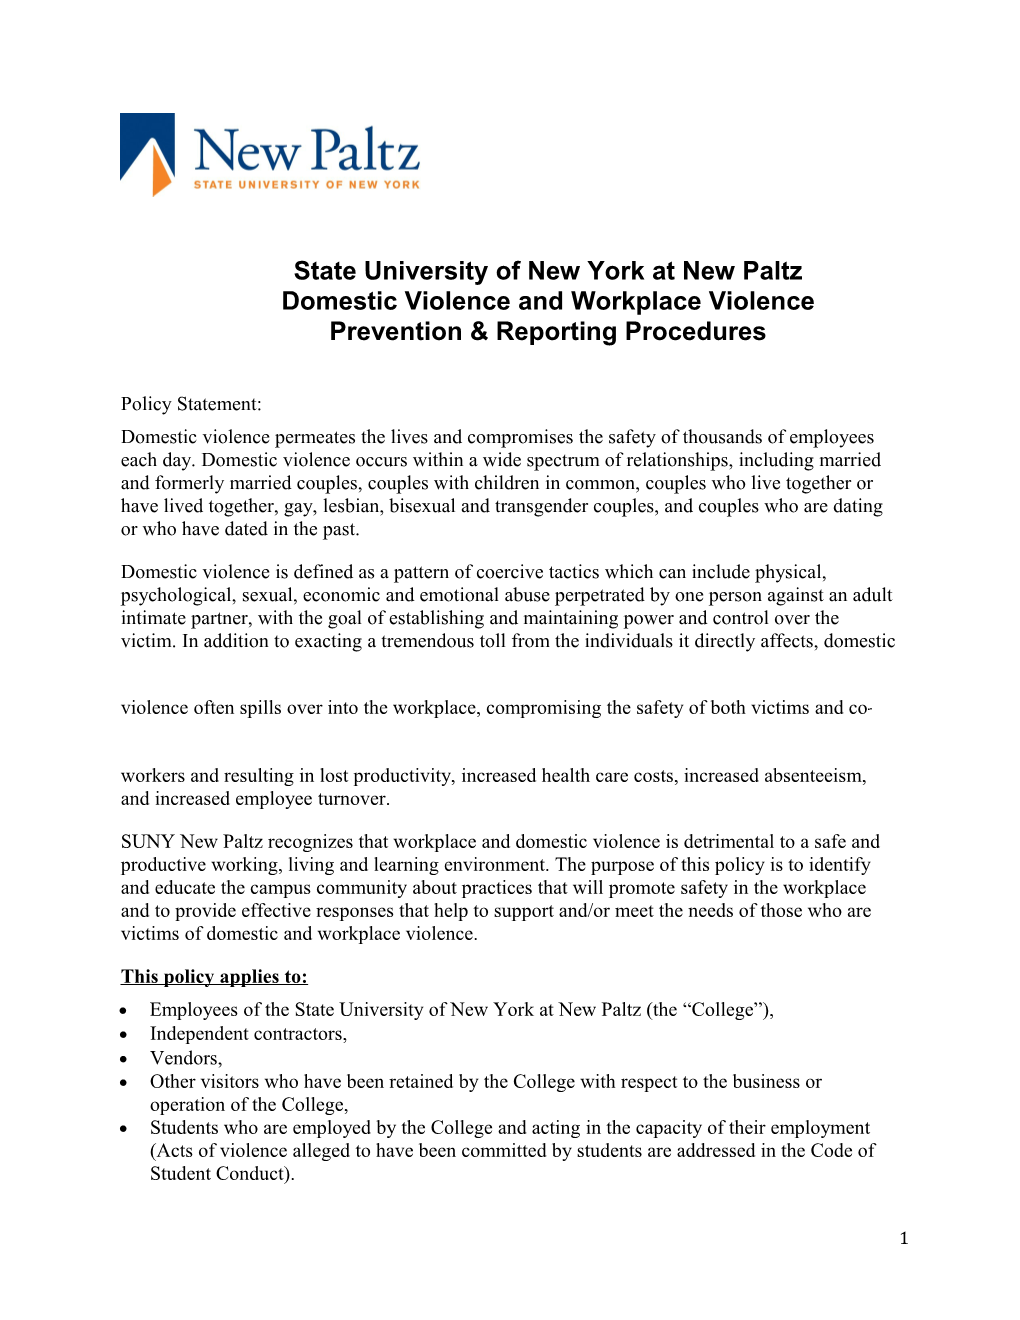 State University of New York at New Paltz Domestic Violence and Workplace Violence Prevention